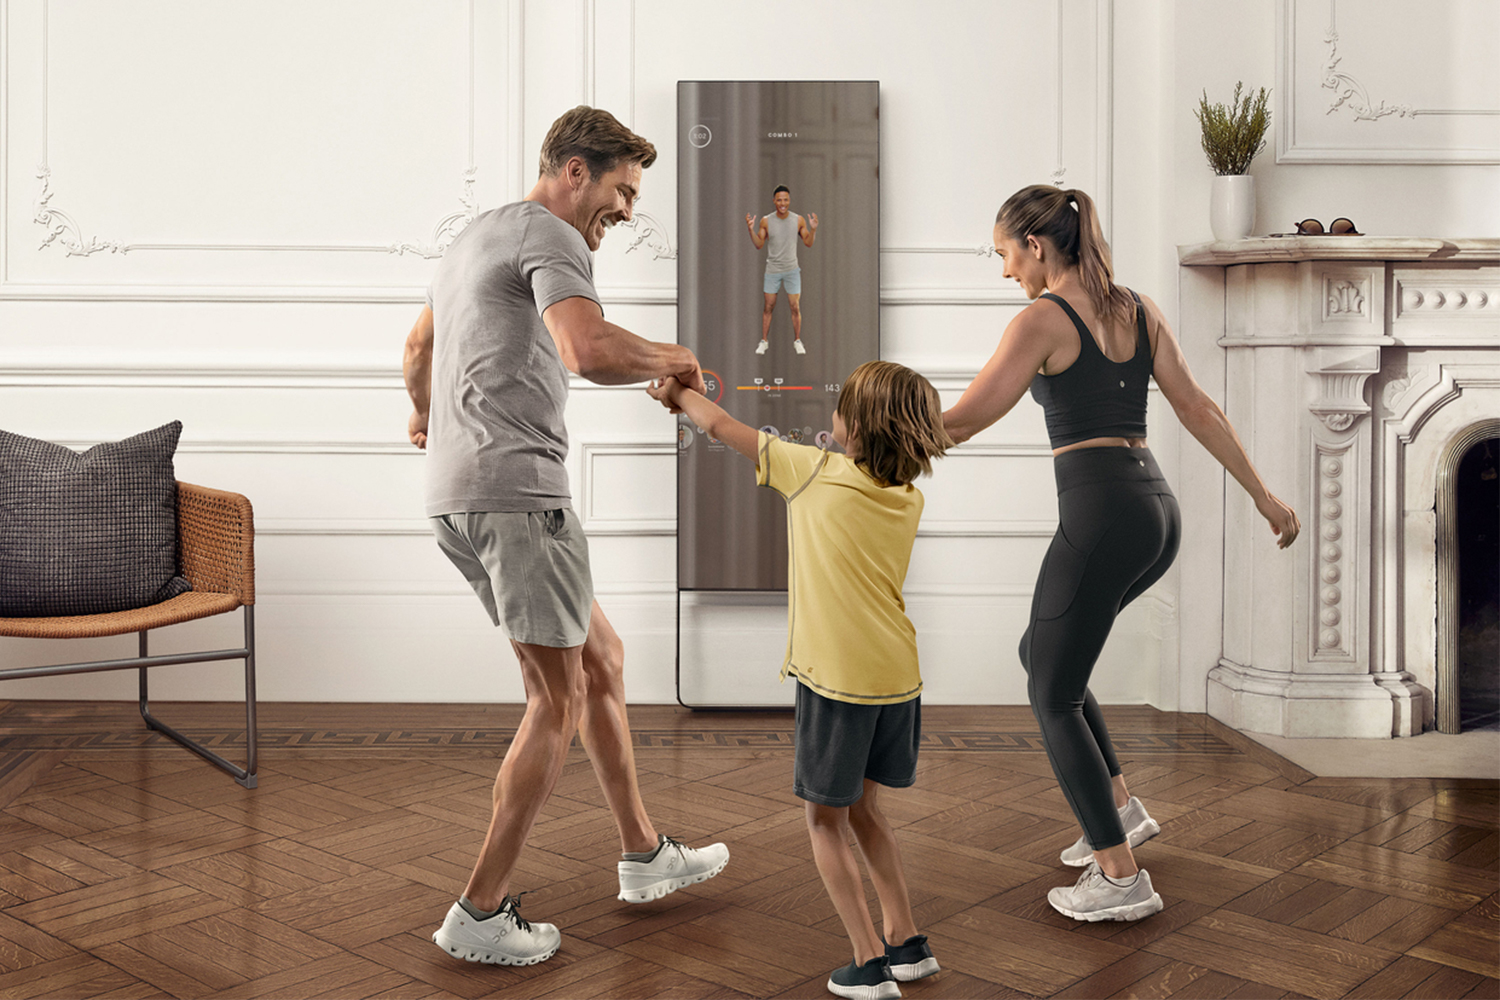 A mum, dad and young son working out with the Mirror, a home fitness machine.  The exercise program includes "Family fun" courses intended for children under the age of 12.